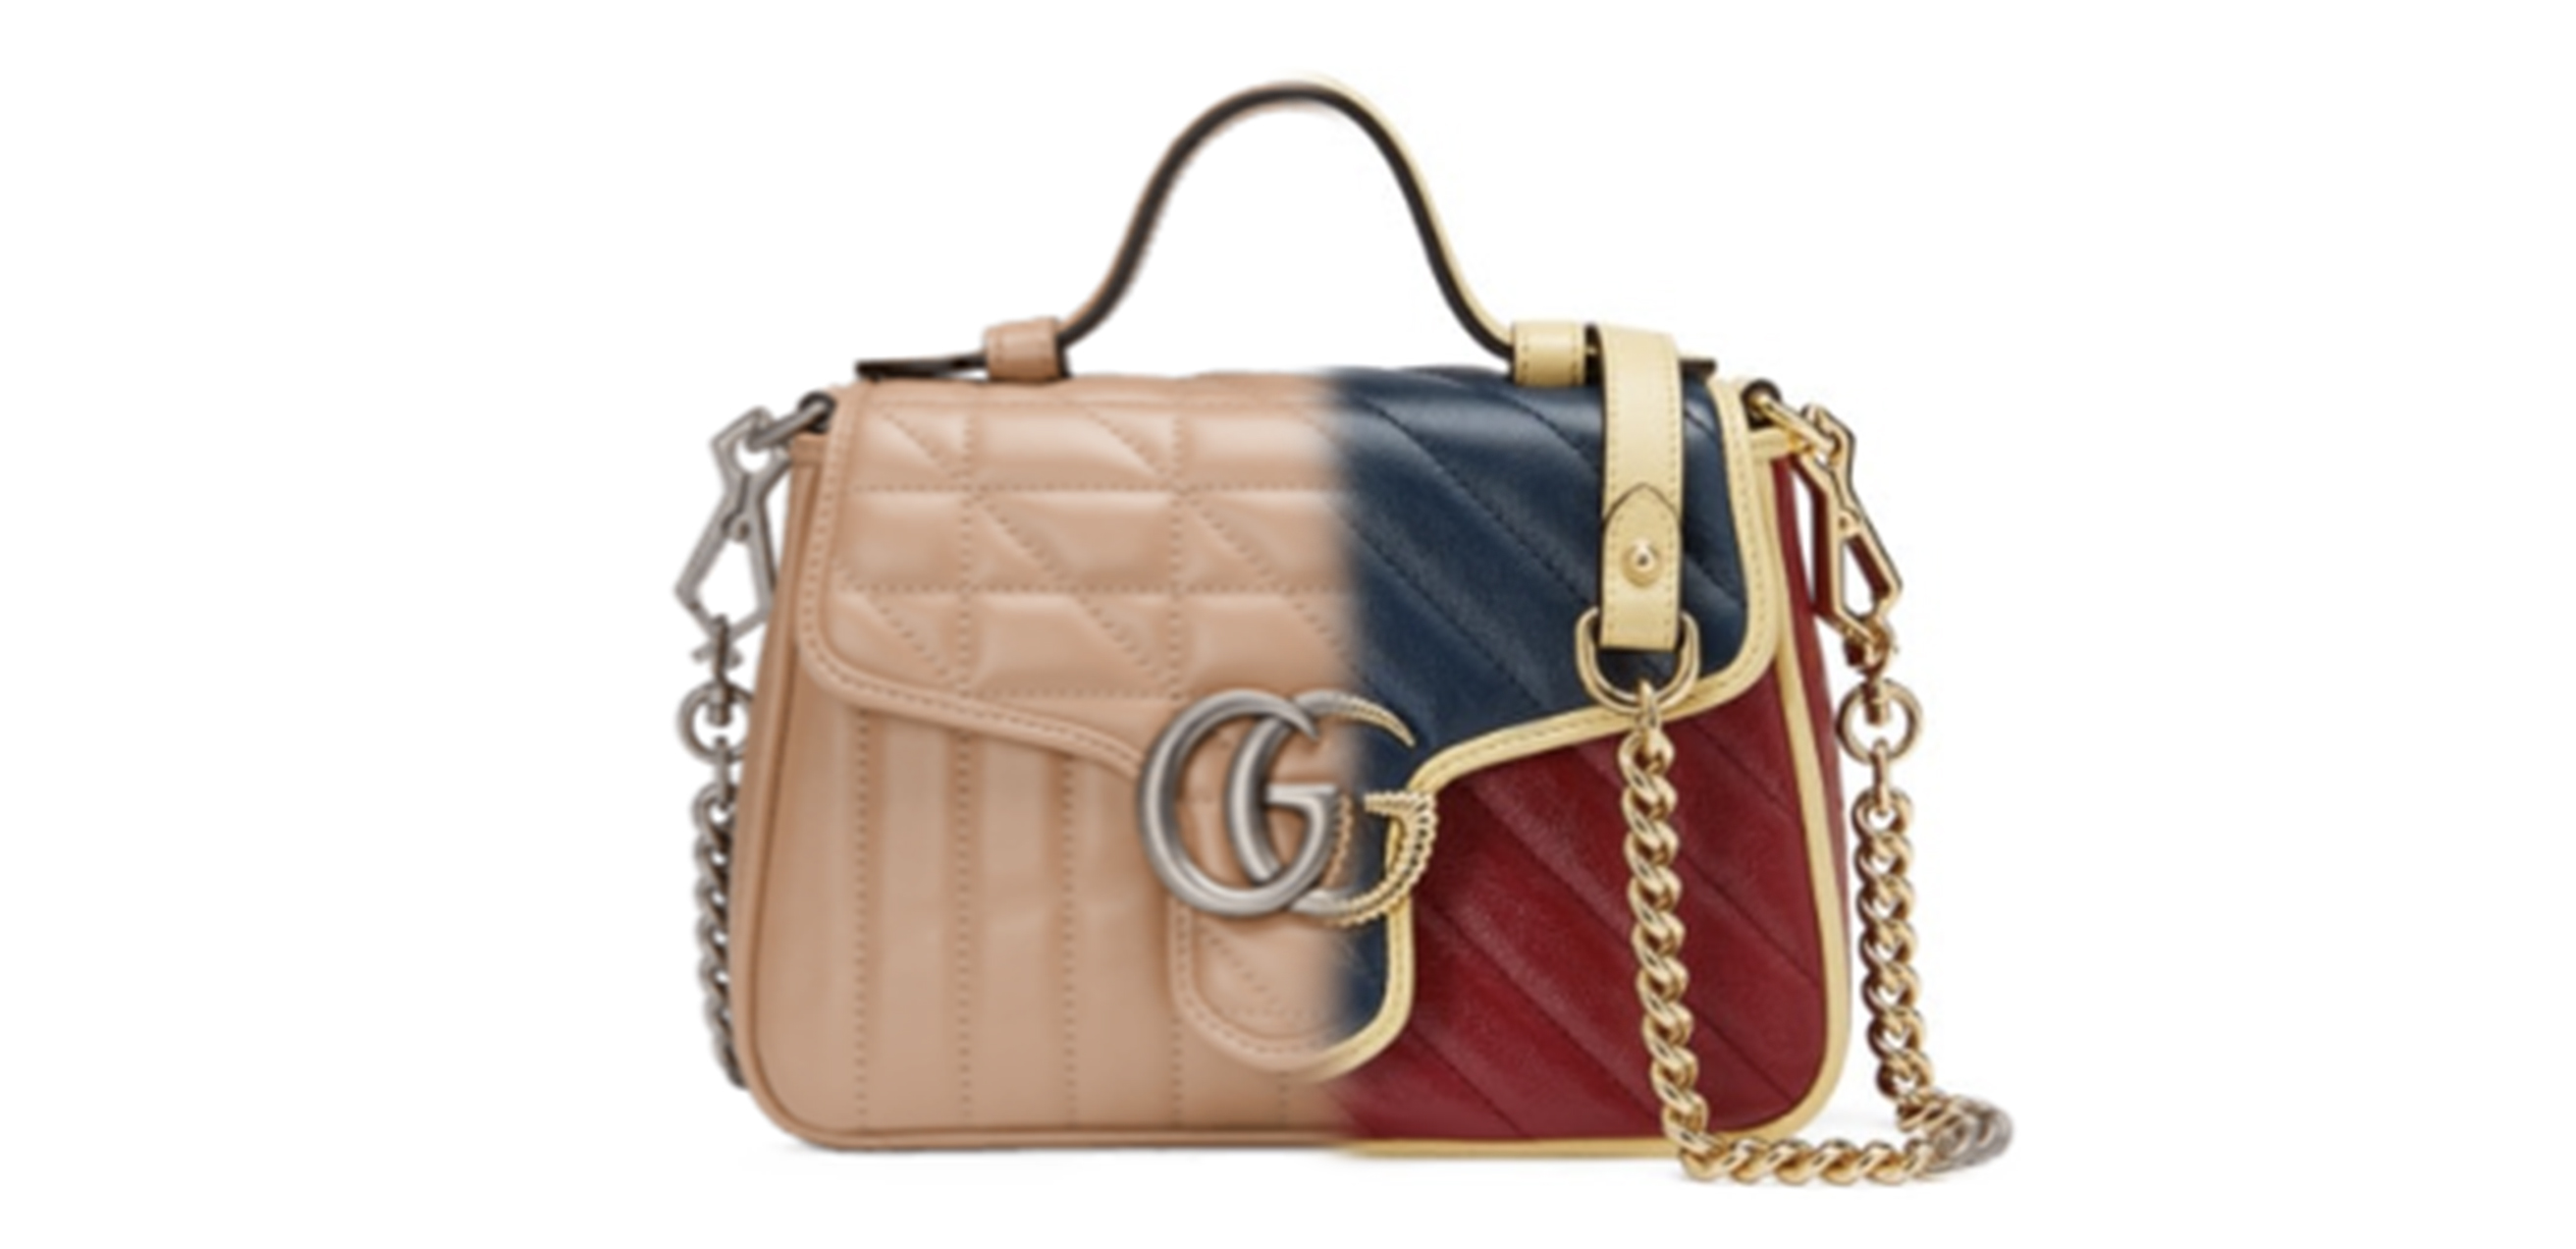 The Gucci Diana Mini Tote Is The Ultimate It-Girl Bag - The Mom Edit